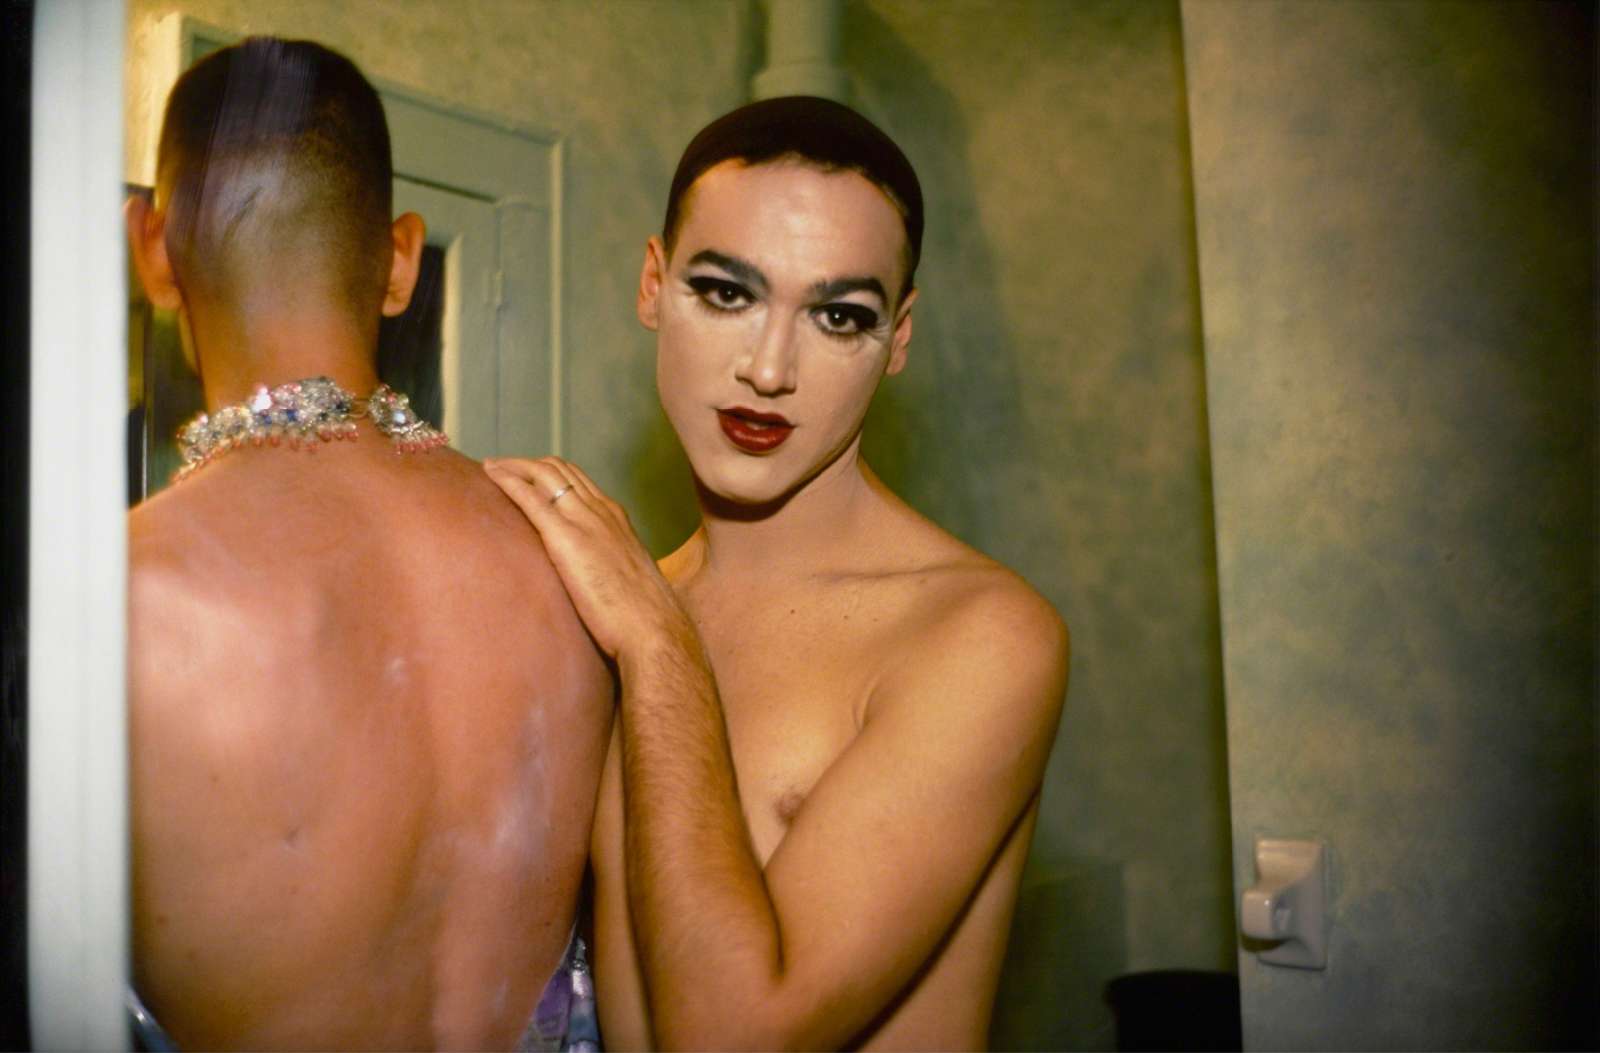 Nan Goldin, Jimmy Paulette and Taboo! in the bathroom, NYC, 1991